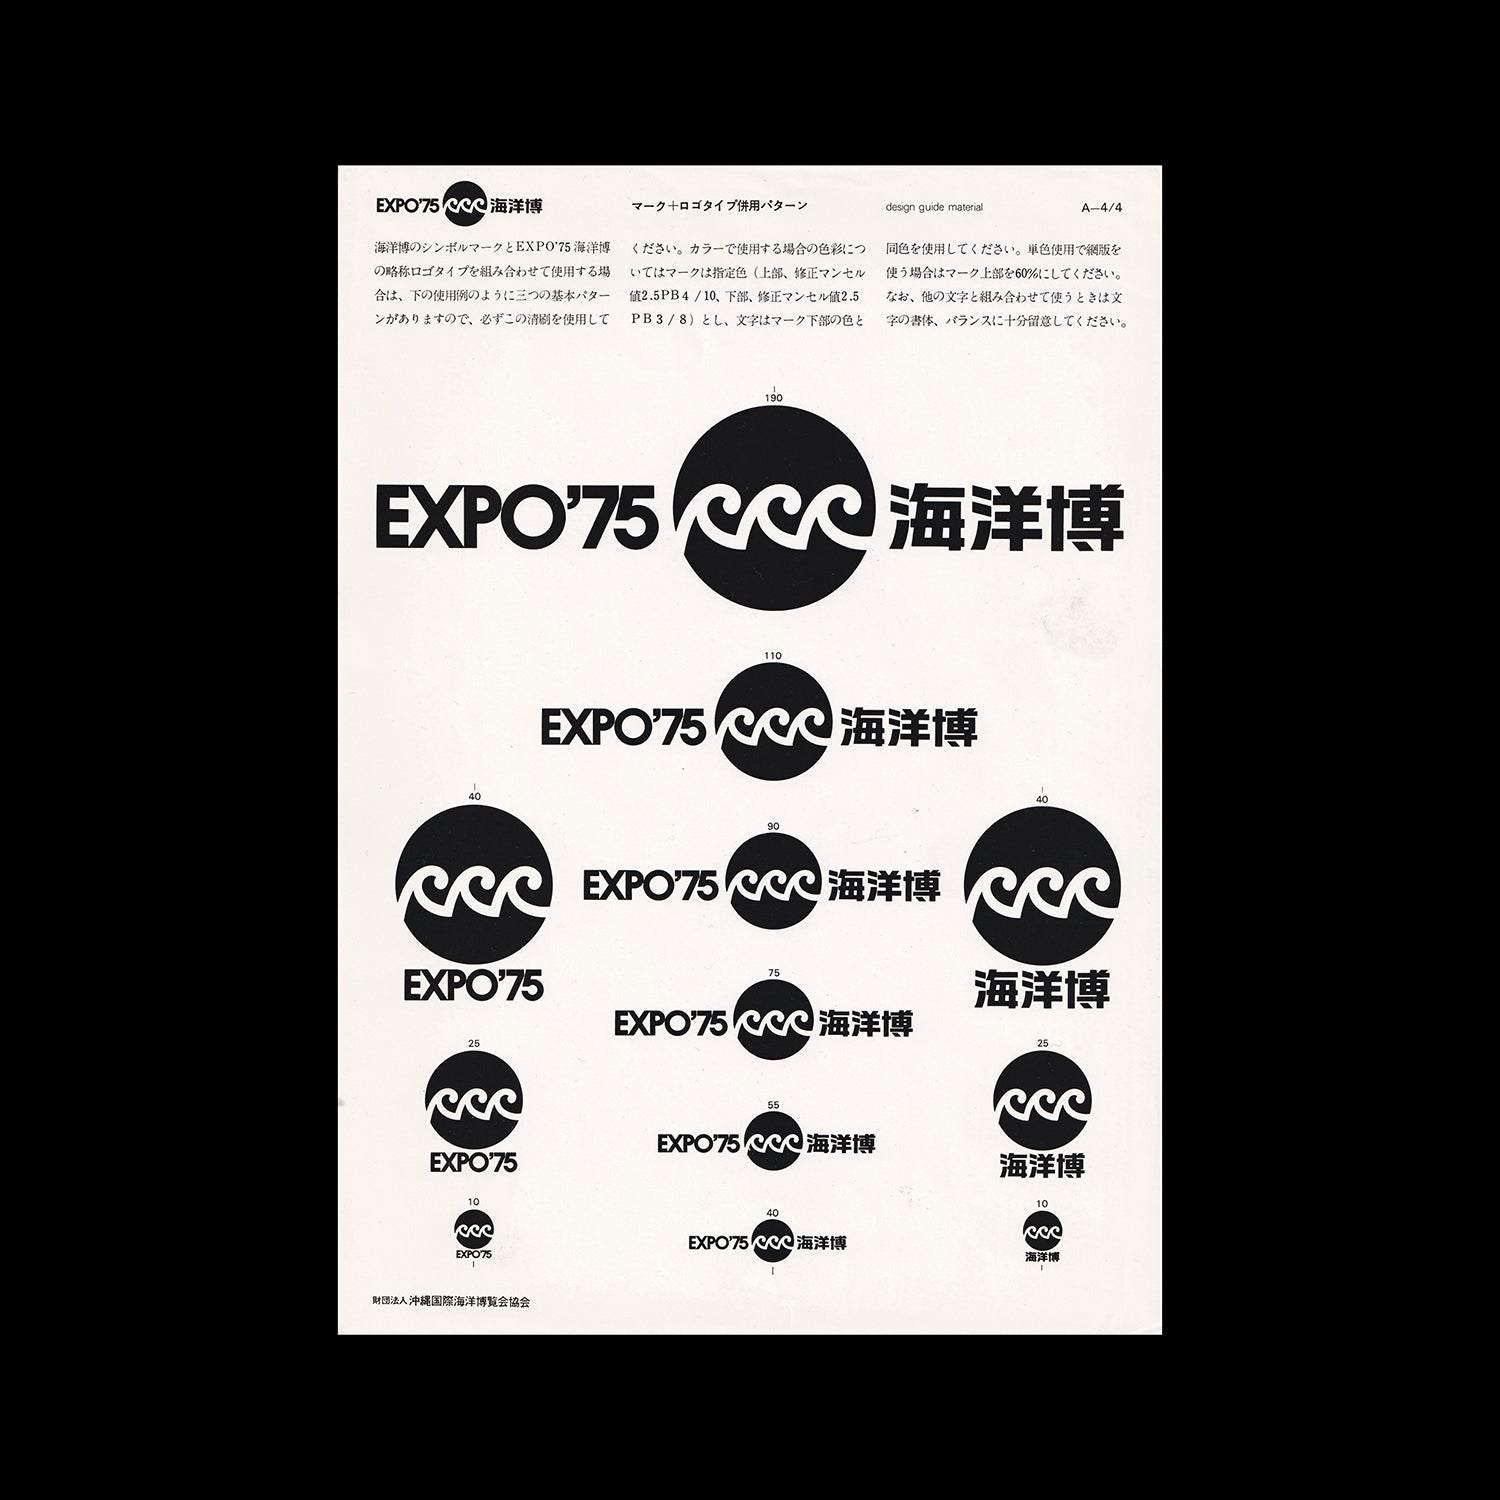 Expo '75 Guidelines, 1972